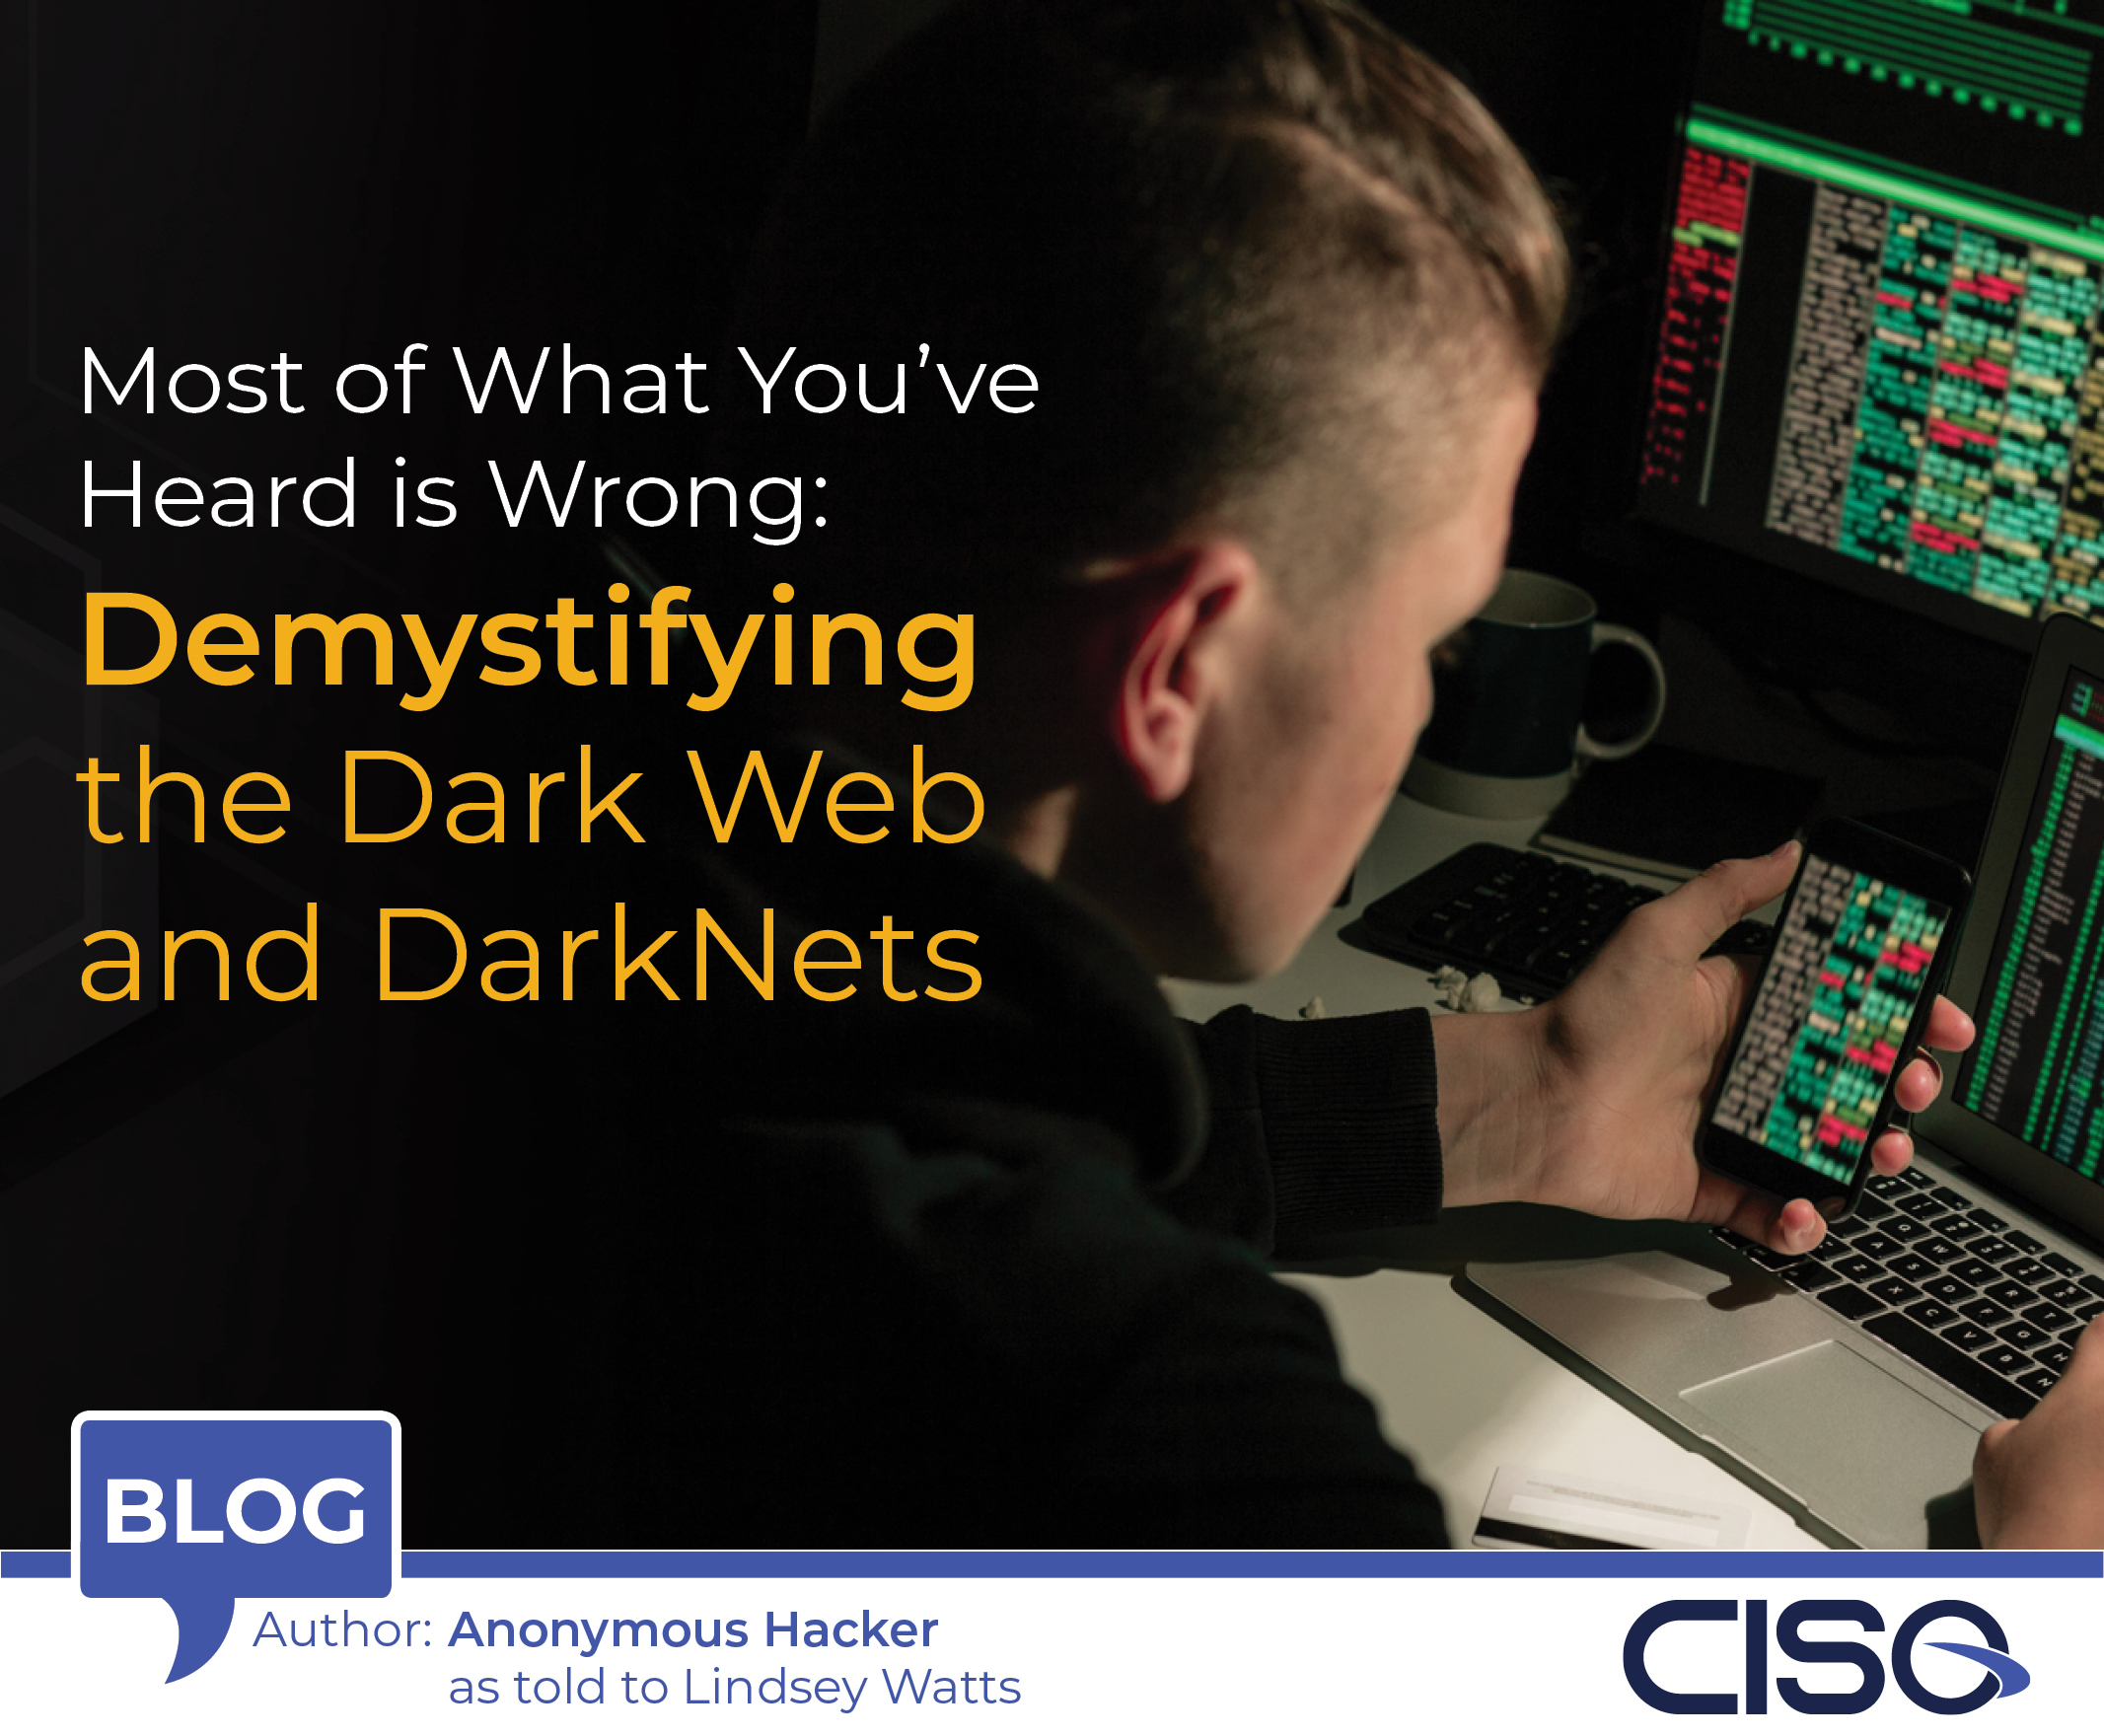 Most of What You’ve Heard Is Wrong: Demystifying the Dark Web